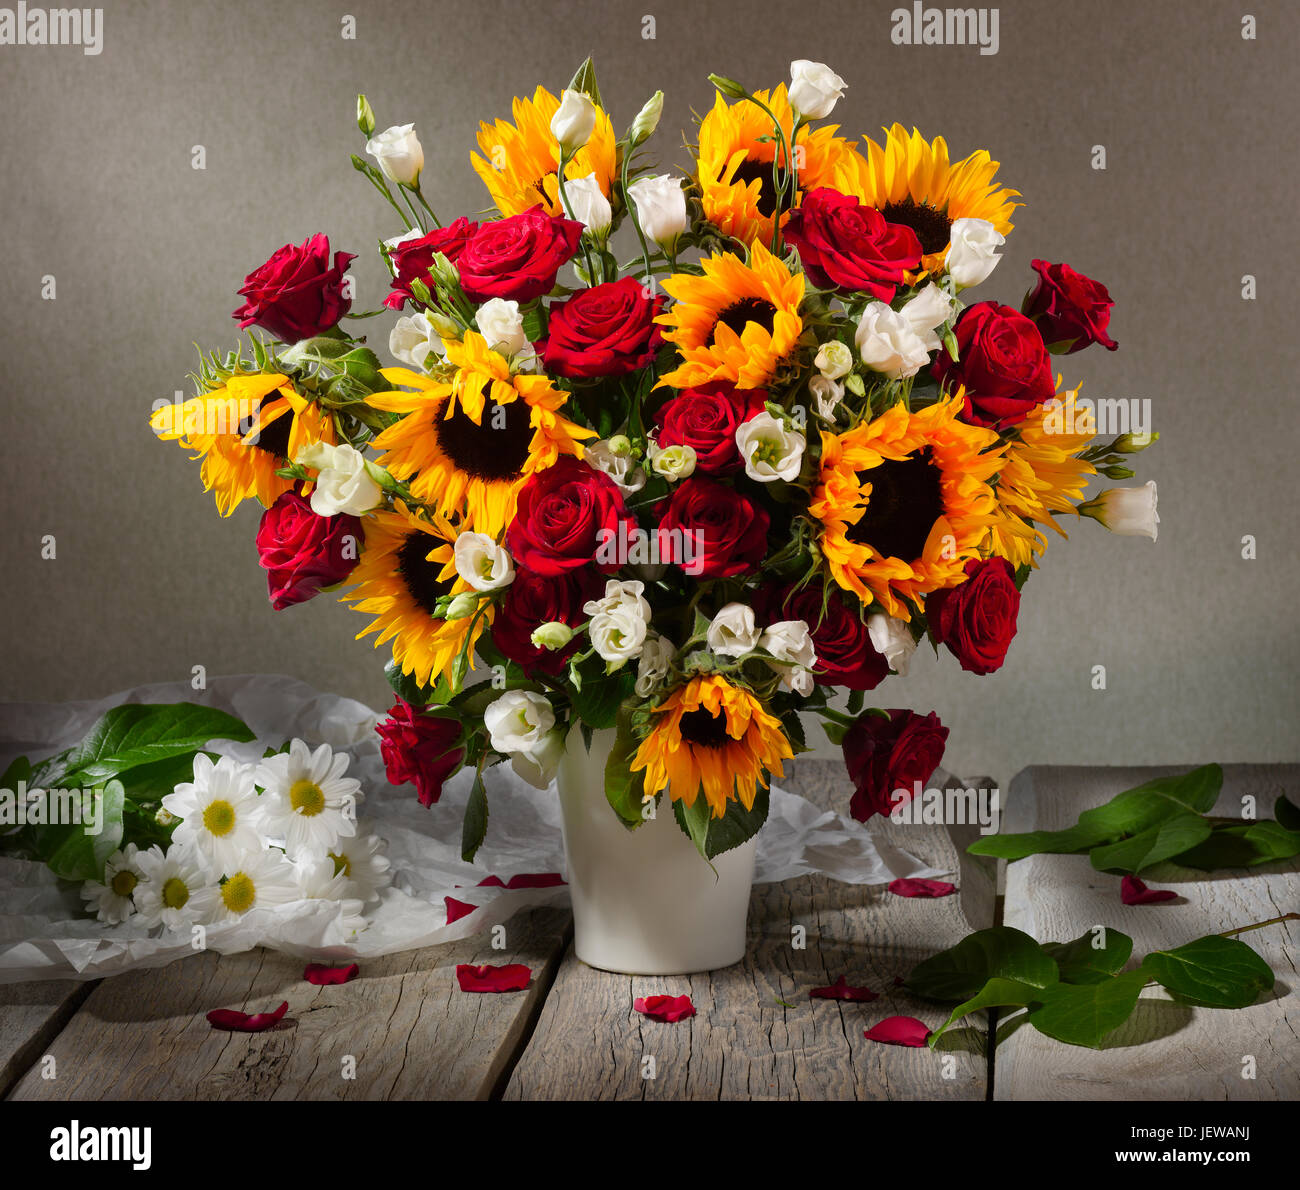 Bouquet of flowers with sunflowers and roses. Stock Photo